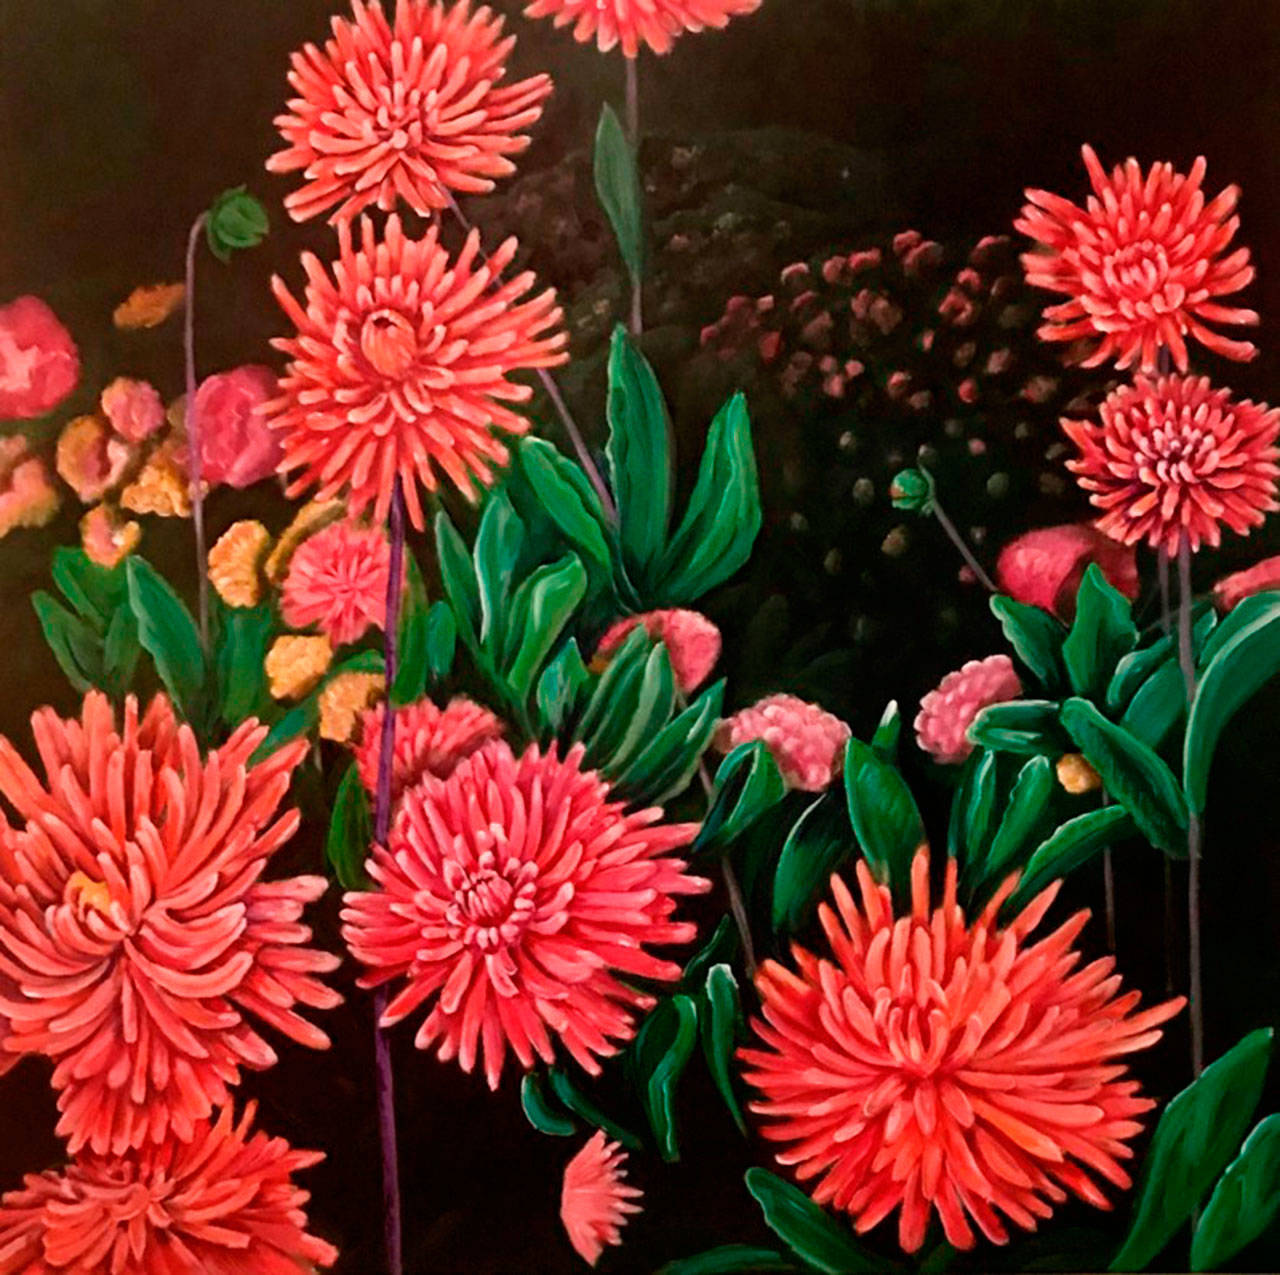 A painting from the “Garden Bliss” collection by Candise Bertram-Royer showing at Café Luna. (Courtesy Photo)